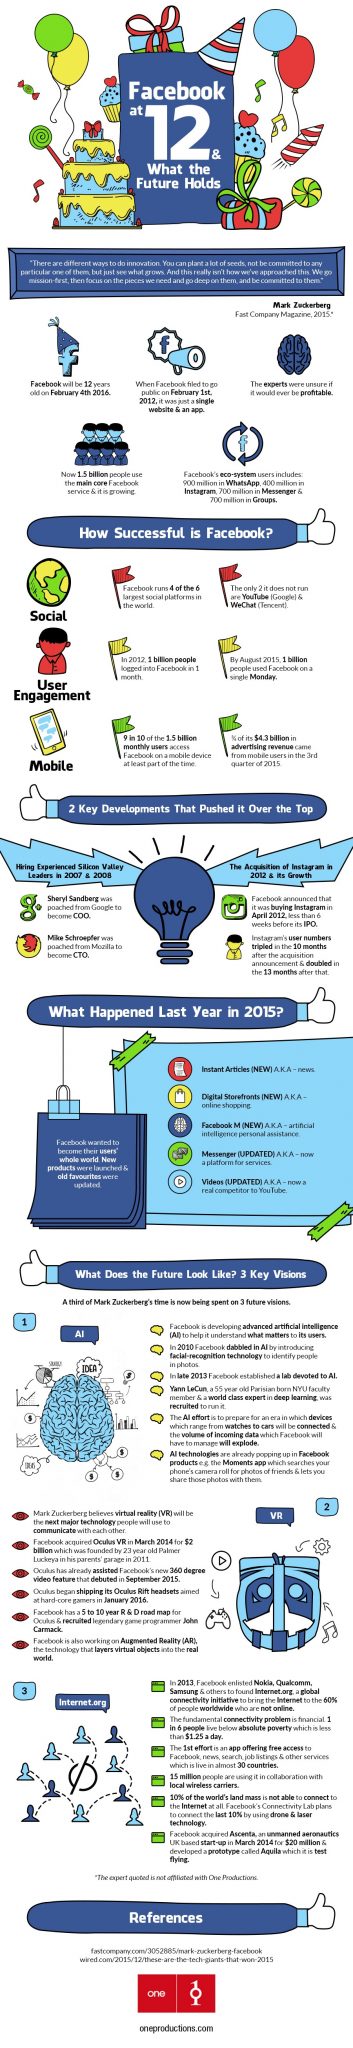 (Infographic) Facebook at 12 & What the Future Holds